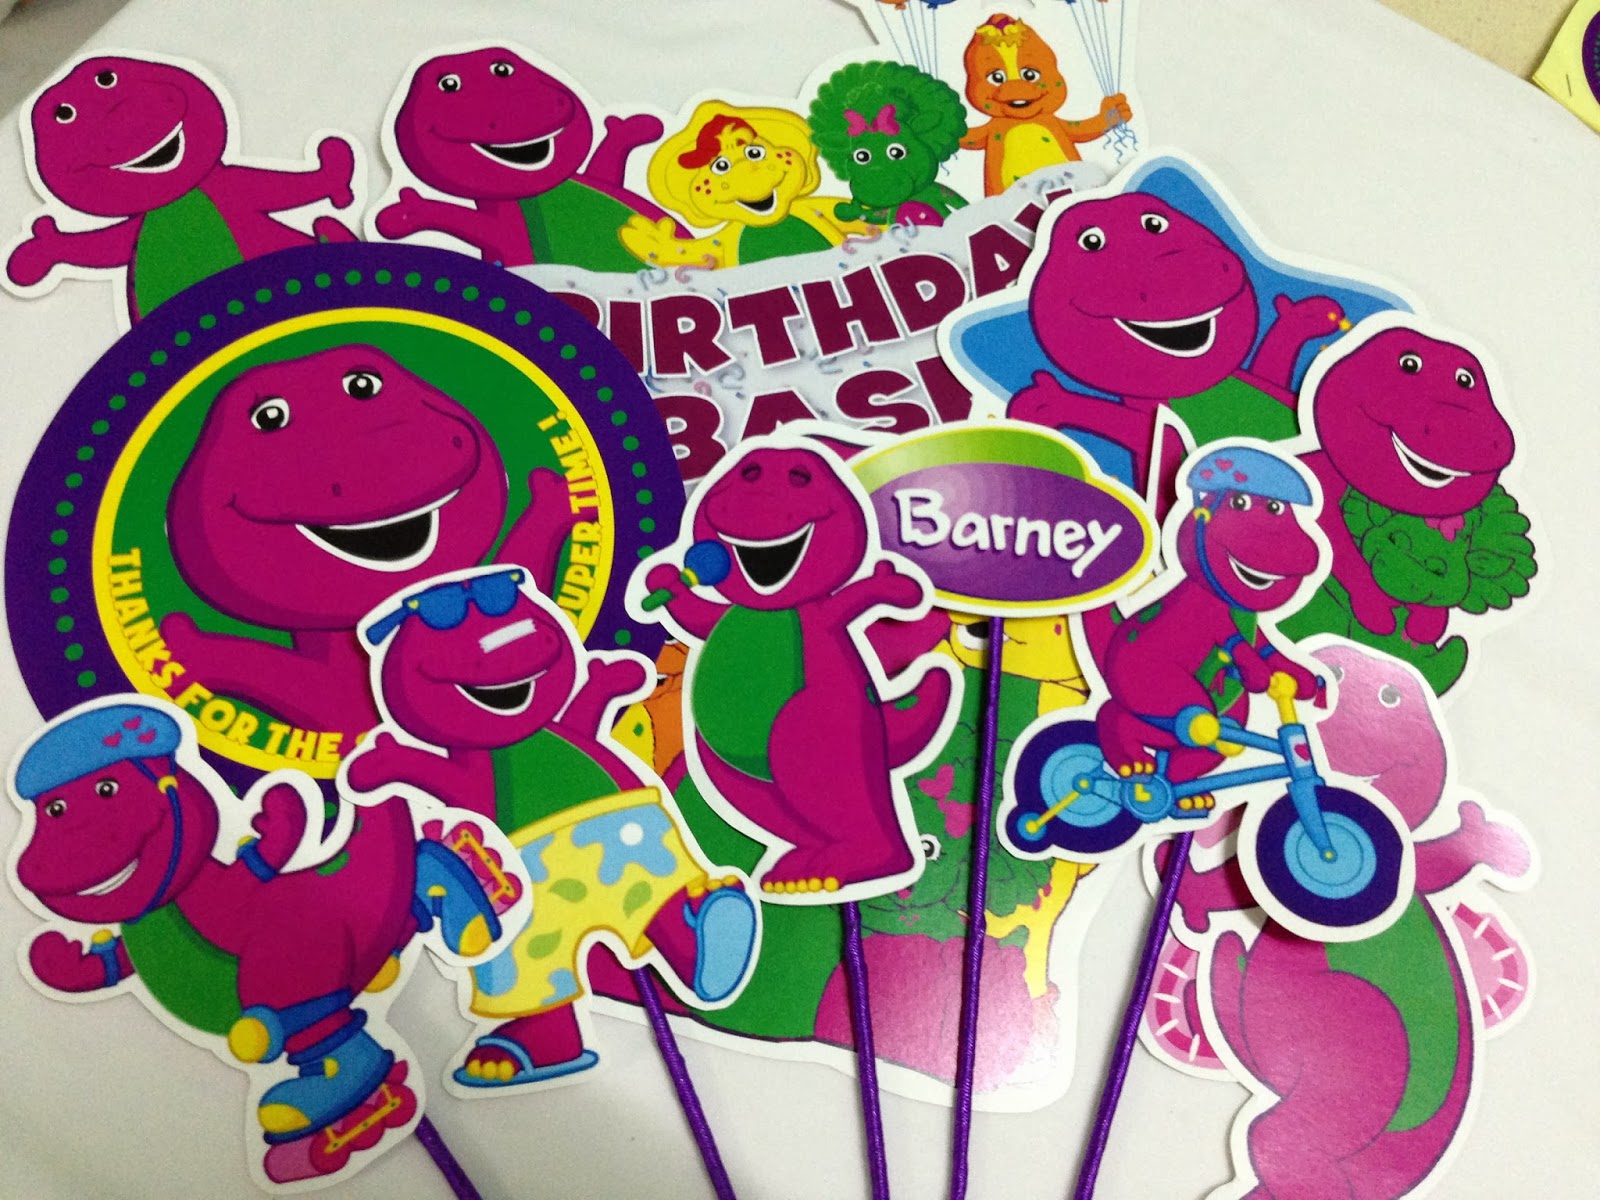 Party Hat Barney Party for baby Aisya.